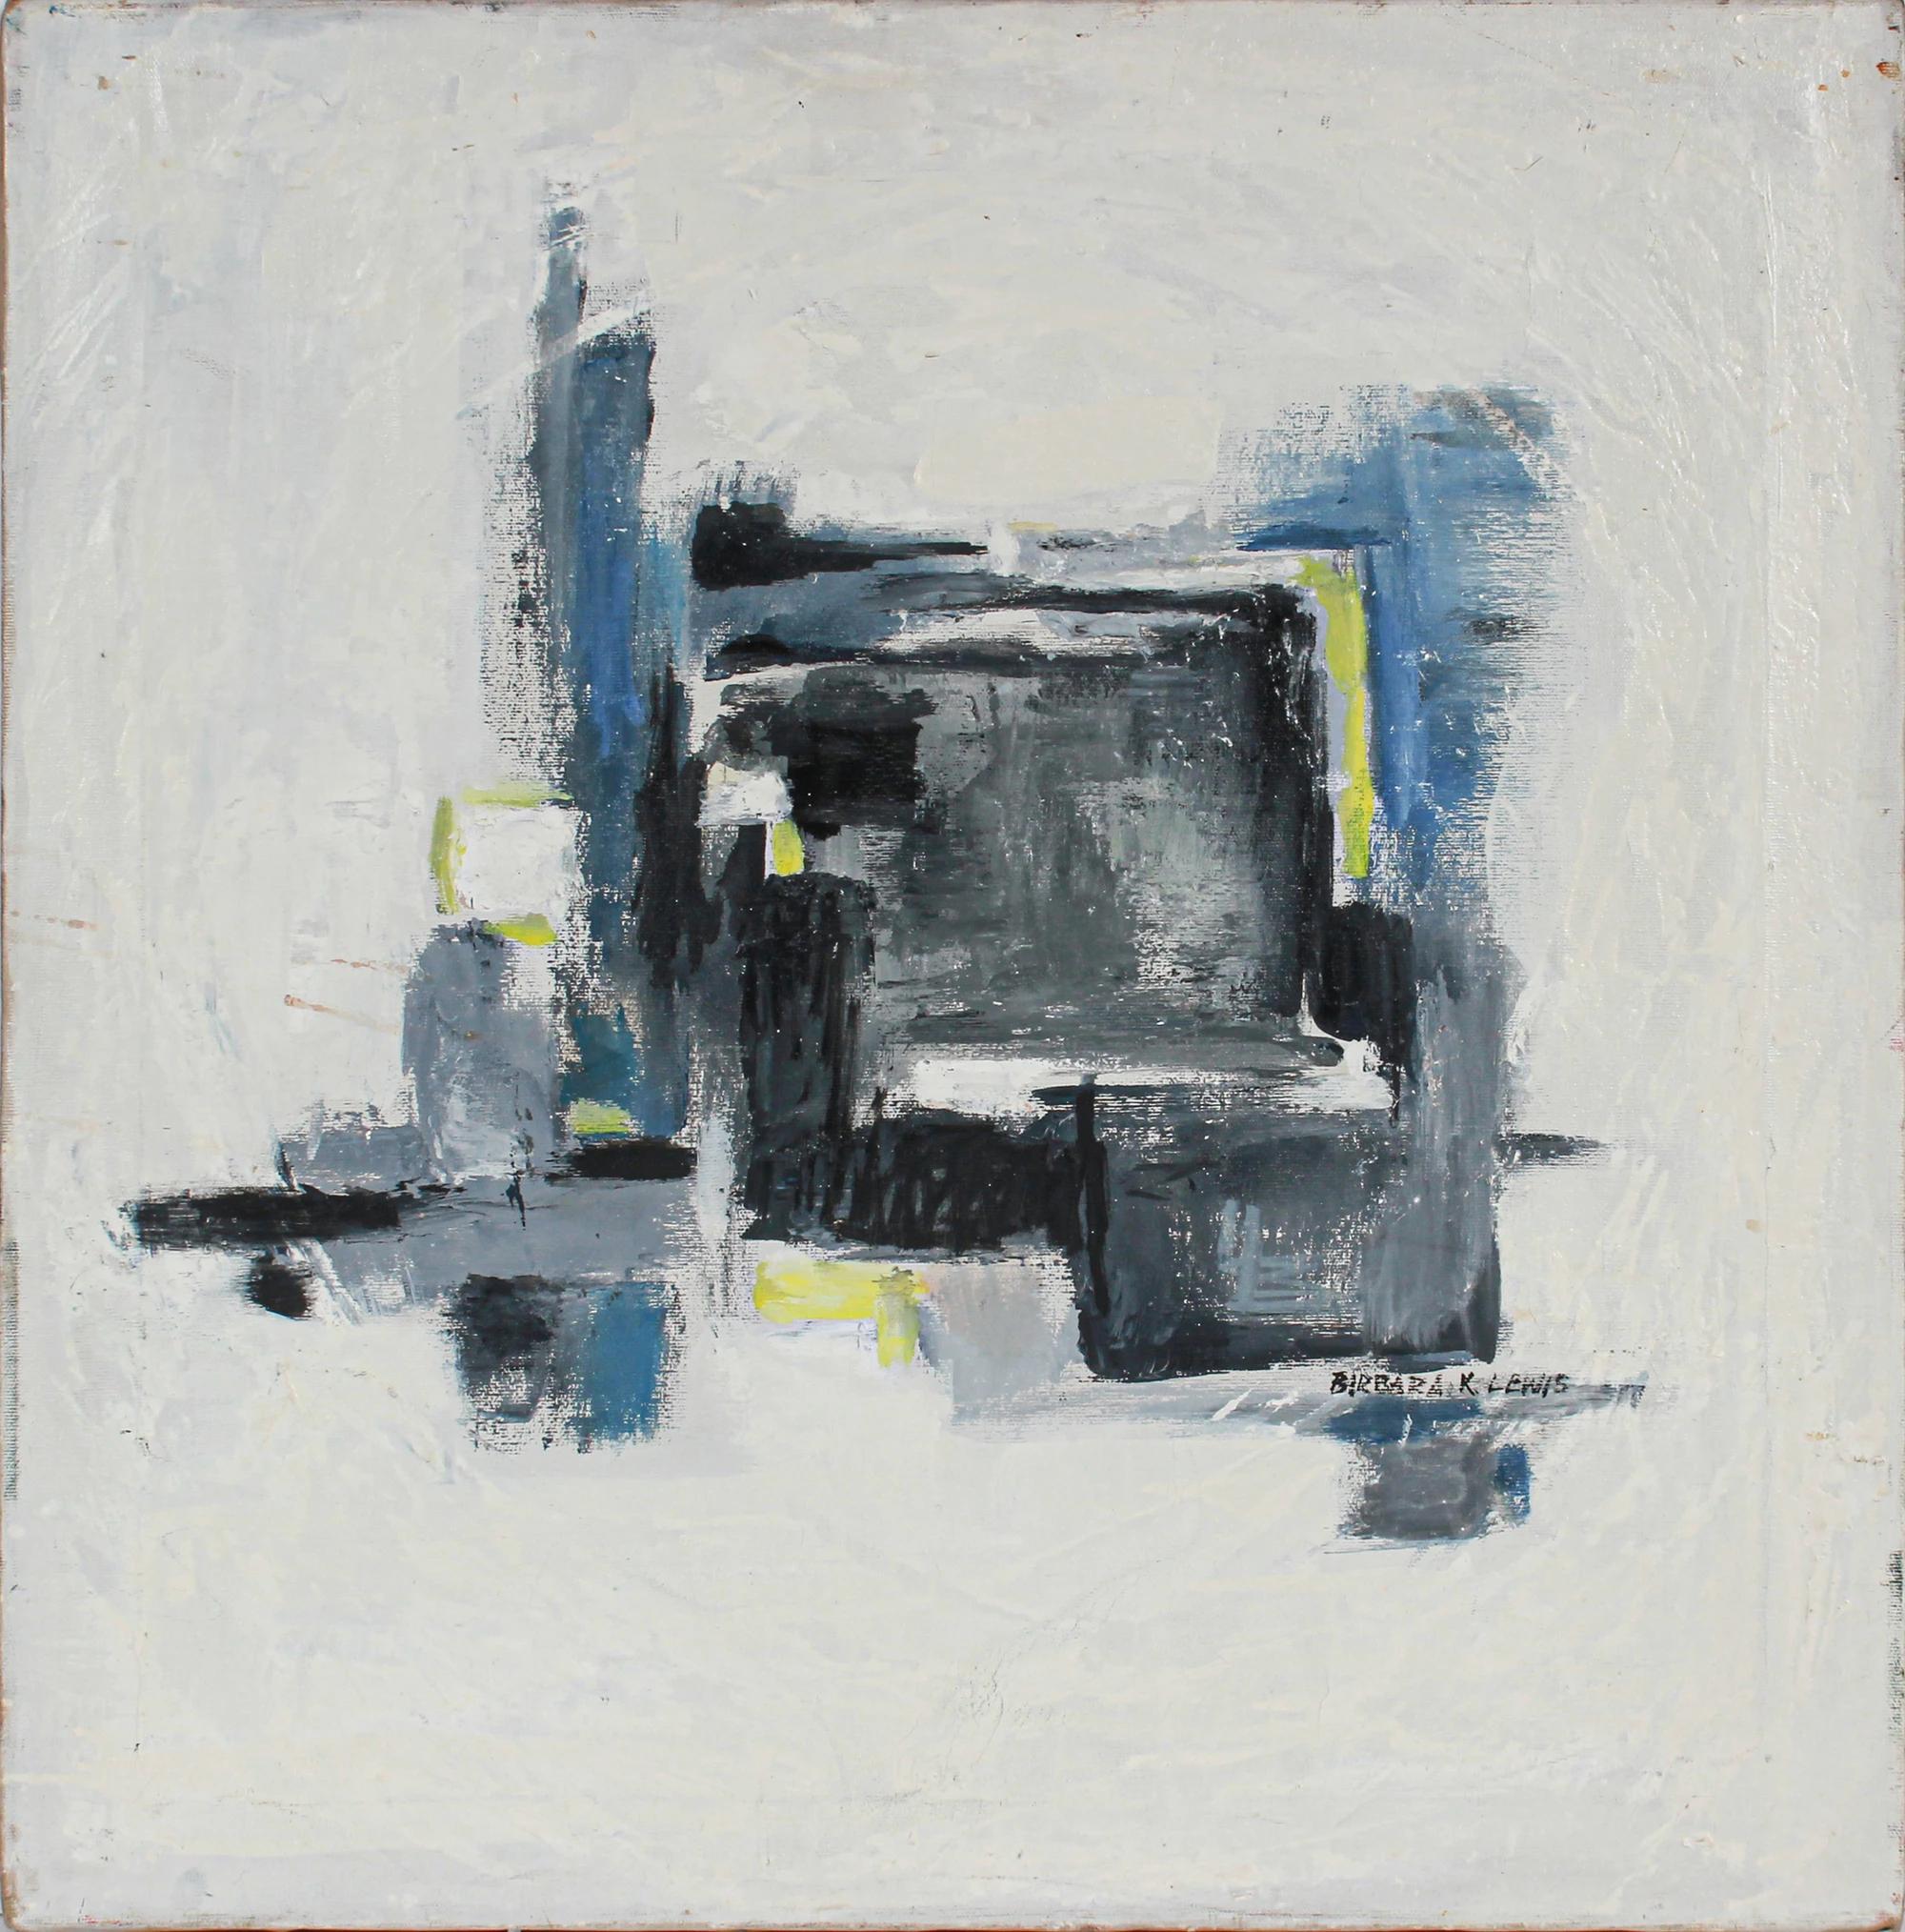 Barbara Lewis Abstract Painting - "Loop in Winter" 20th Century Oil Painting Abstract in Blue